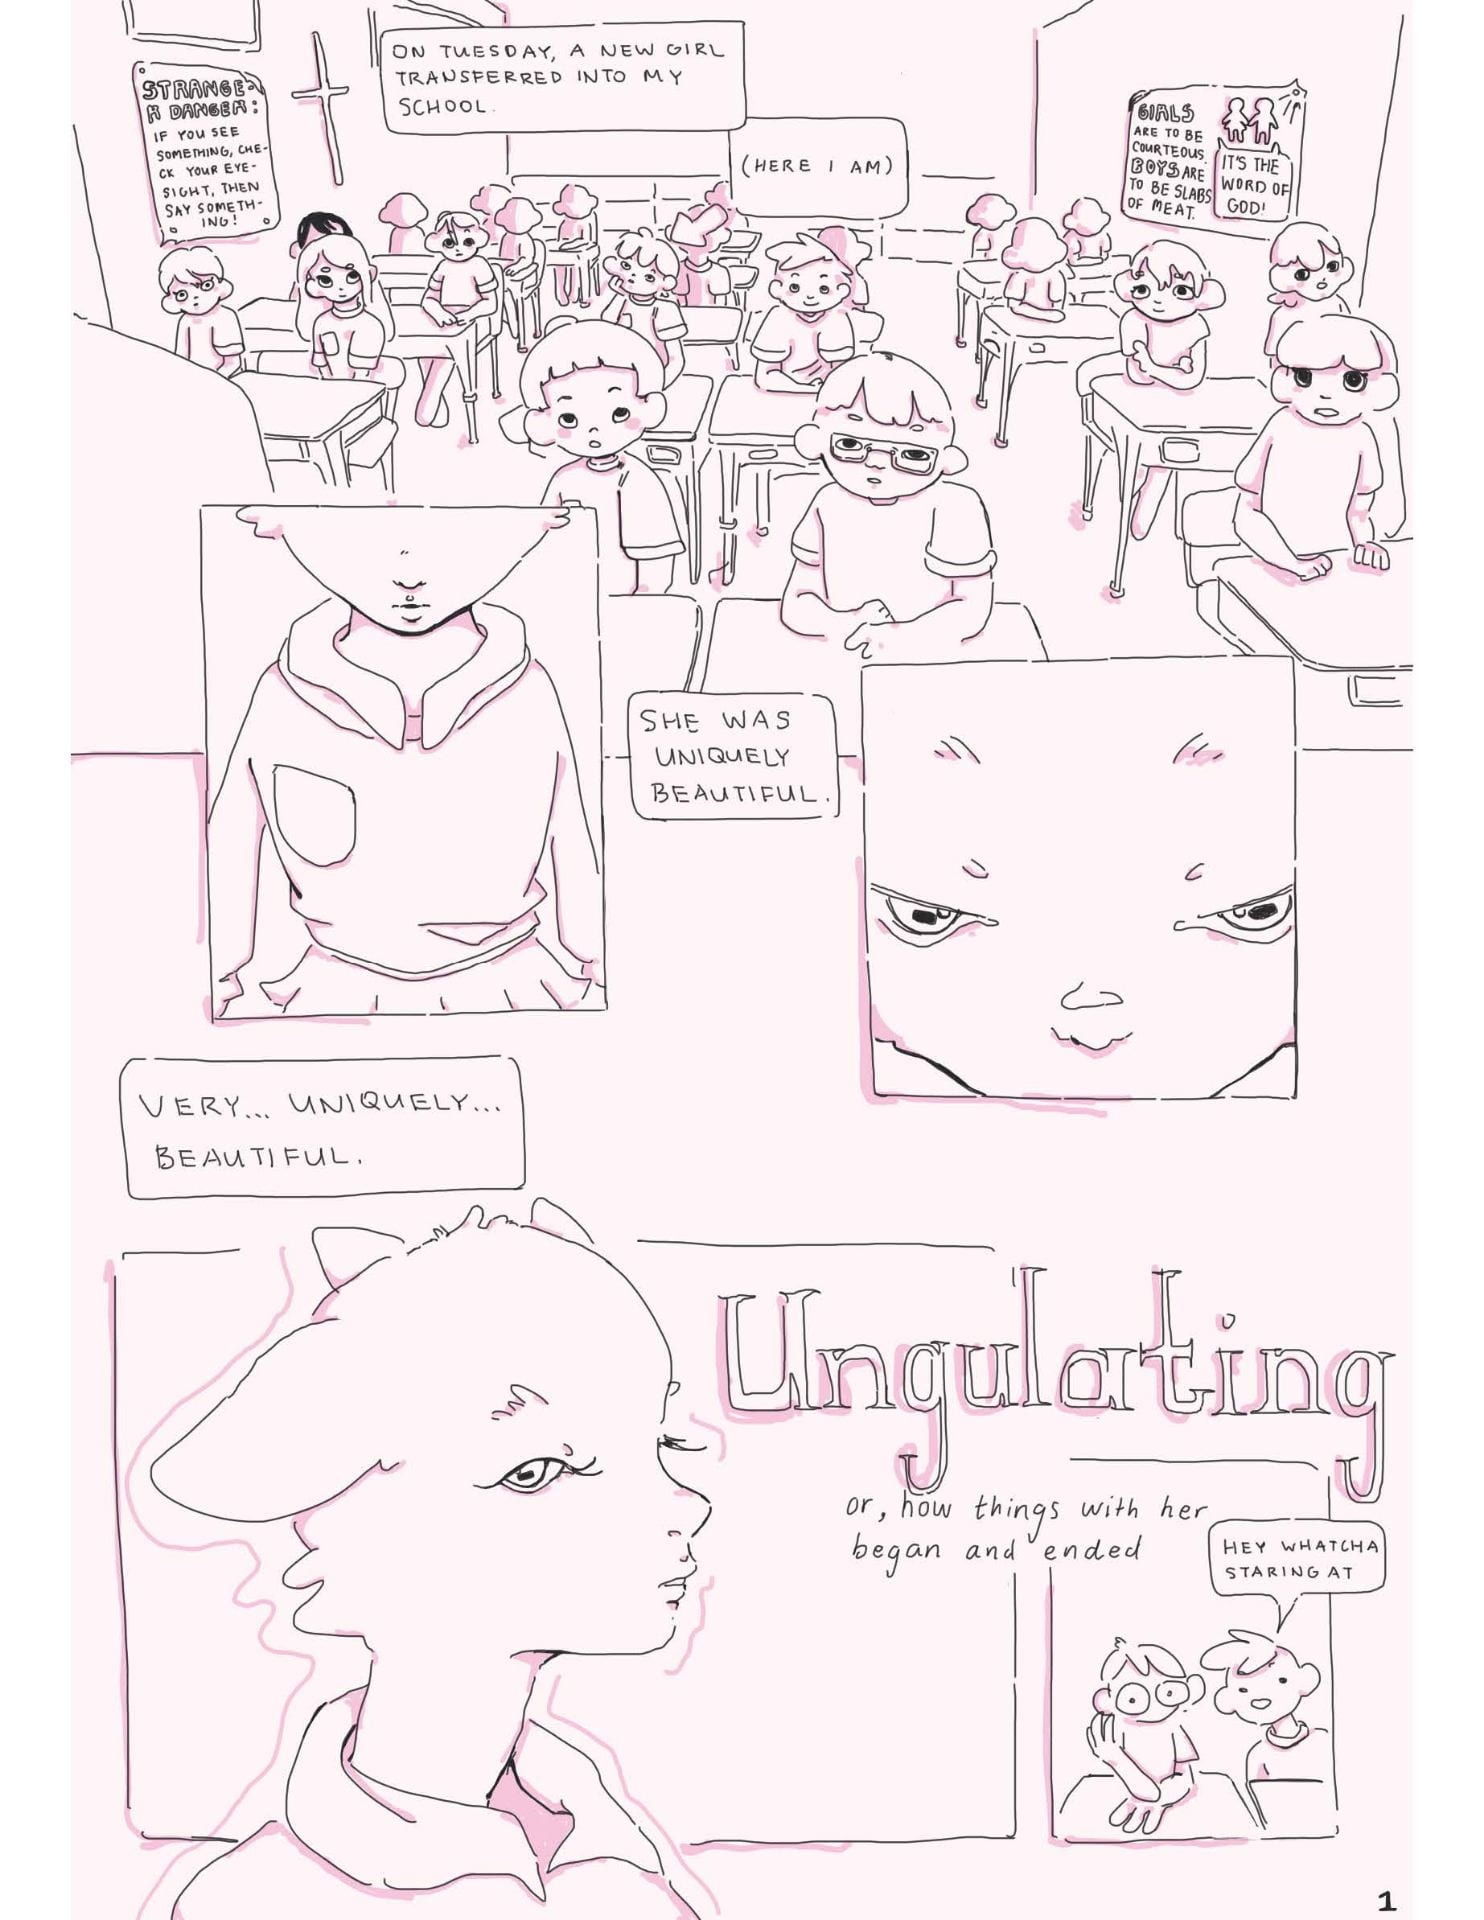 M. Chen - Comic Page 1 - Our narrator spots the new girl in school who is uniquely beautiful